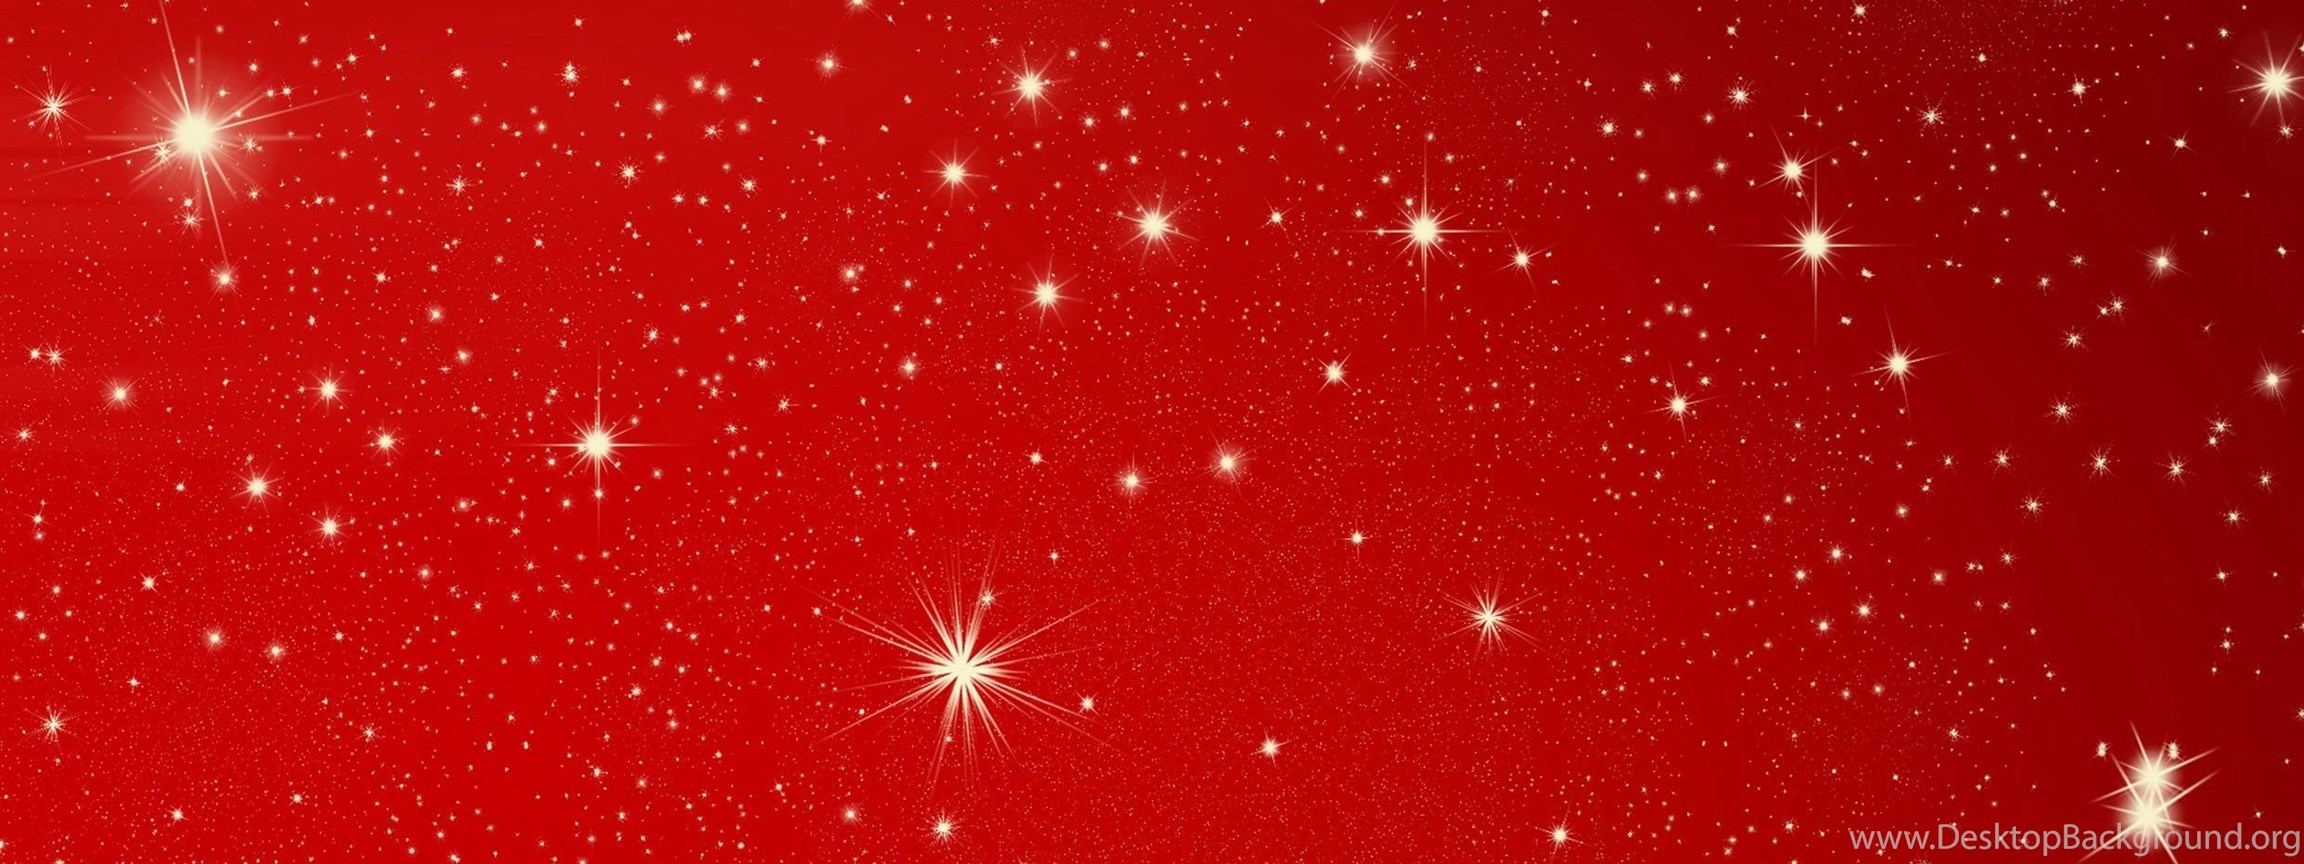 Stars At Xmas Background Image, Cards Or Christmas Wallpaper. Desktop Background